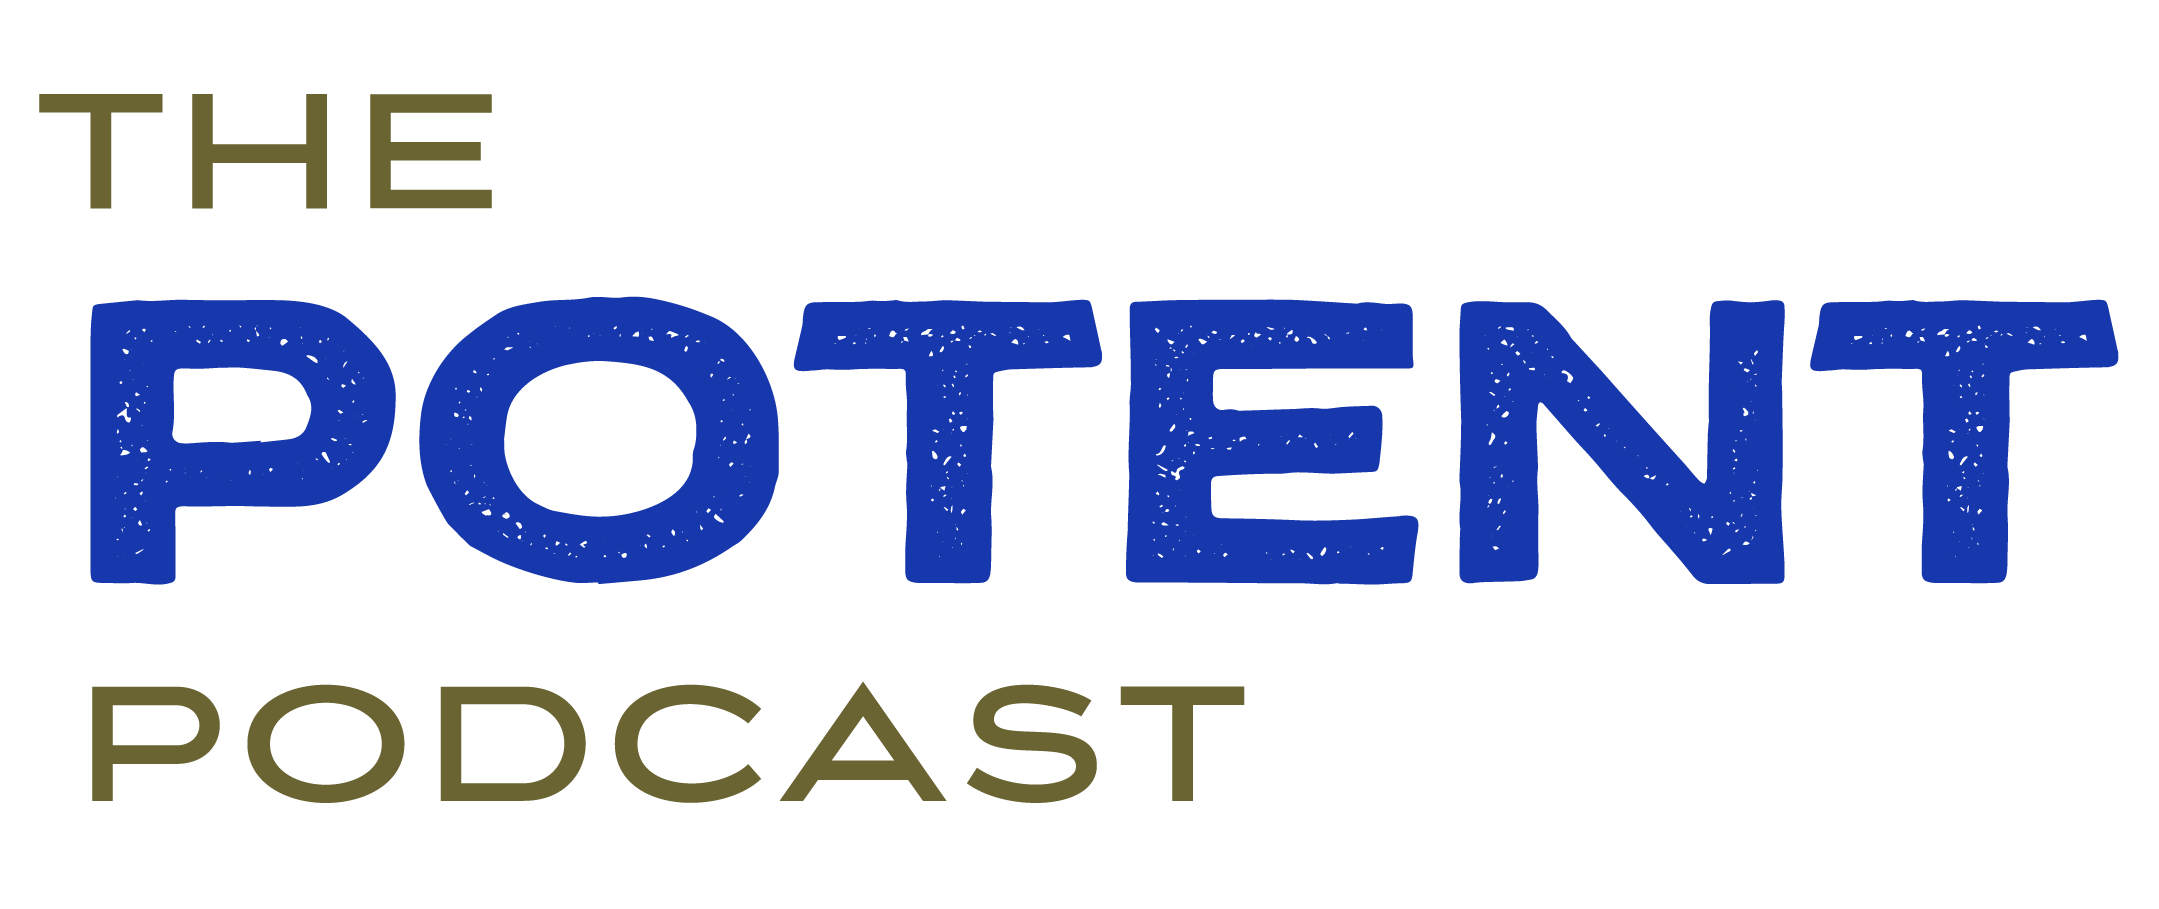 The Potent Podcast